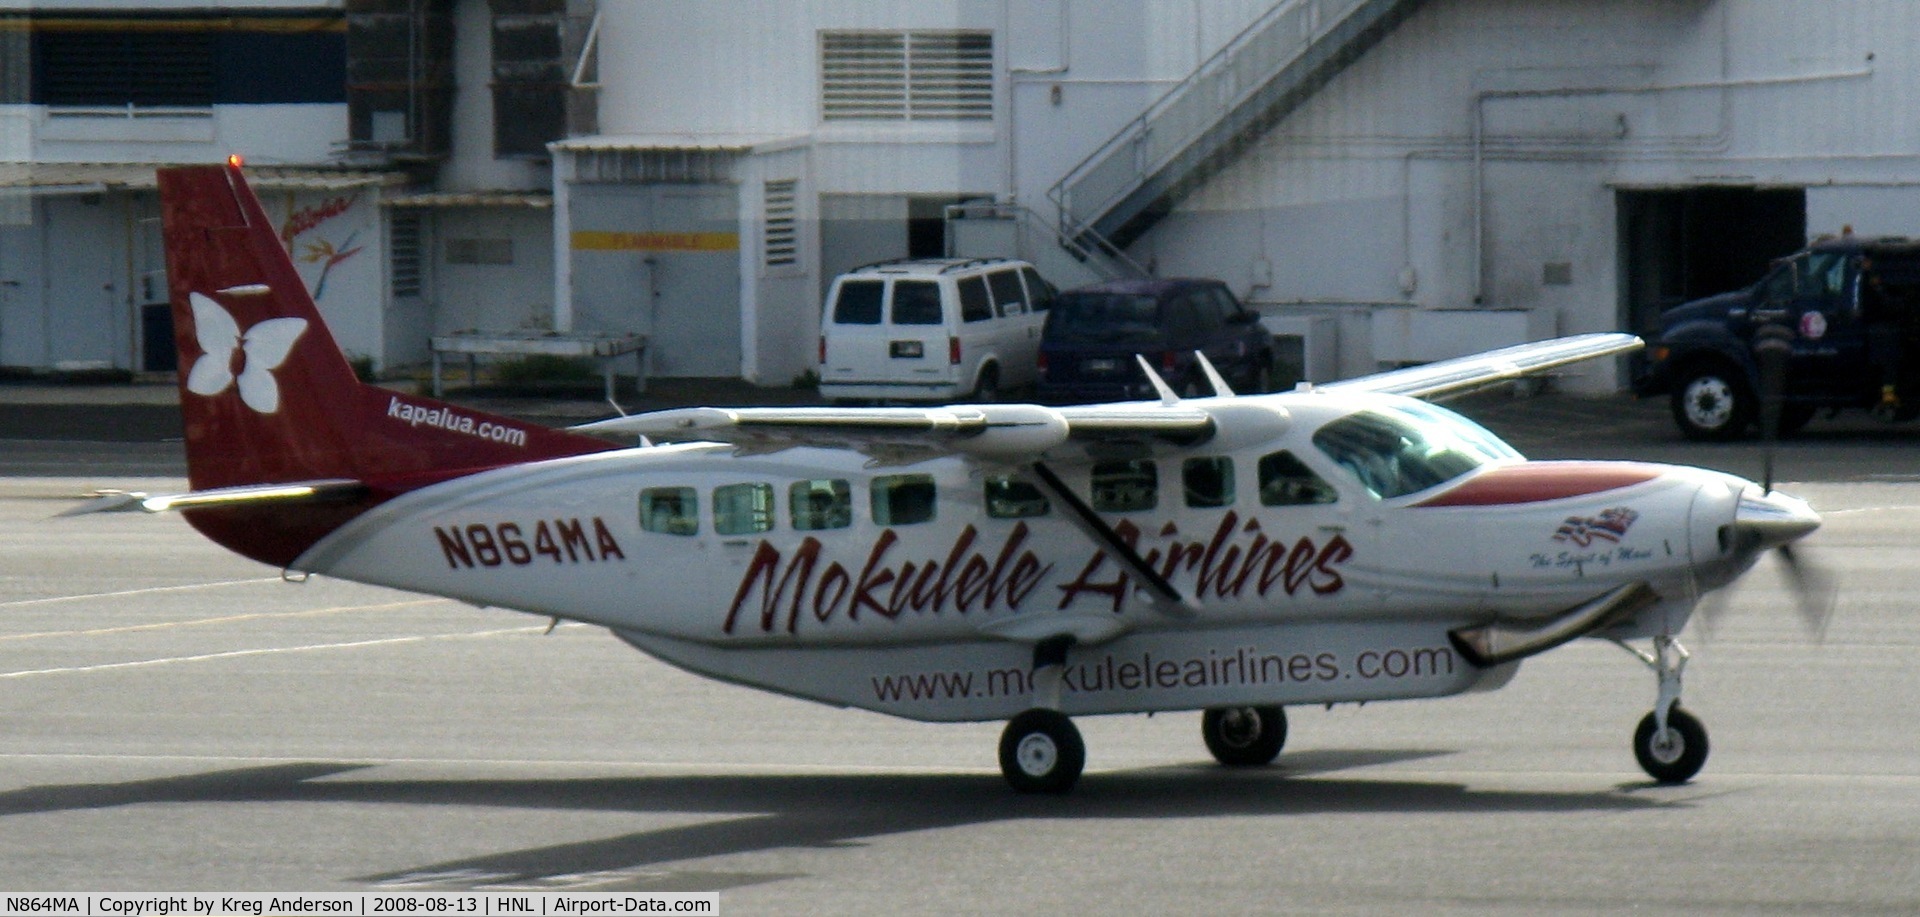 N864MA, 2007 Cessna 208B C/N 208B1275, After arrival from a neigboring island